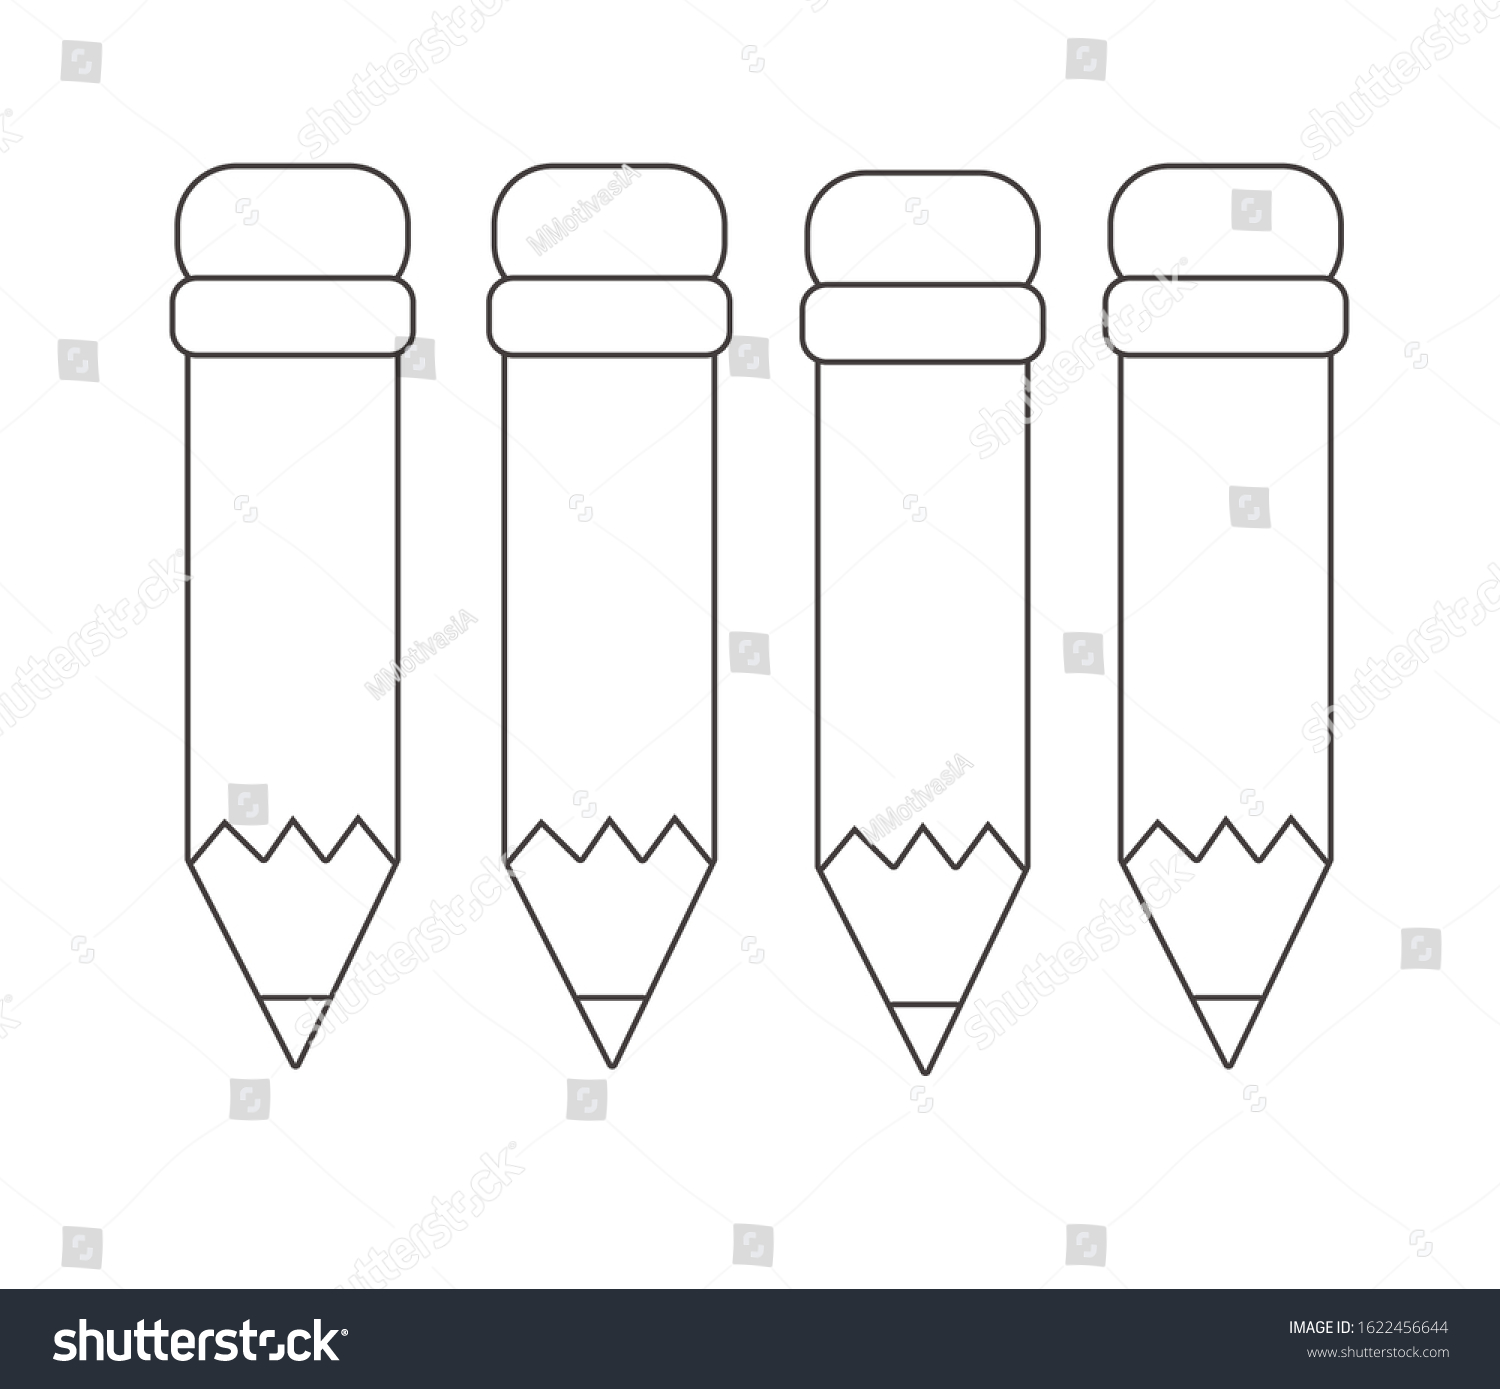 Four Pencils Illustration Coloring Sheet Printable Stock Vector Royalty Free 1622456644